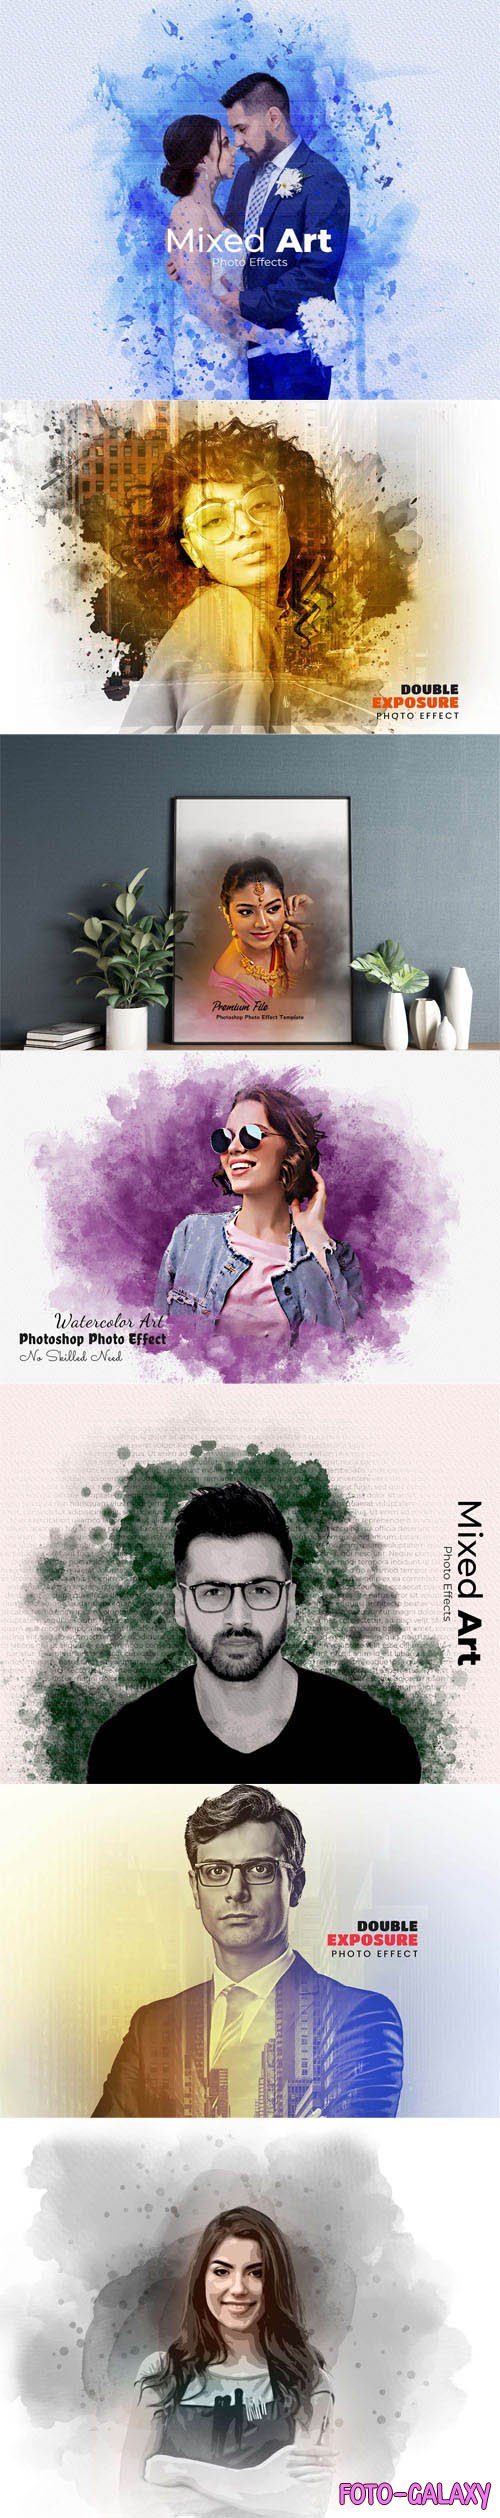 10+ Best Photo Effects & Actions for Photoshop [Vol.7]